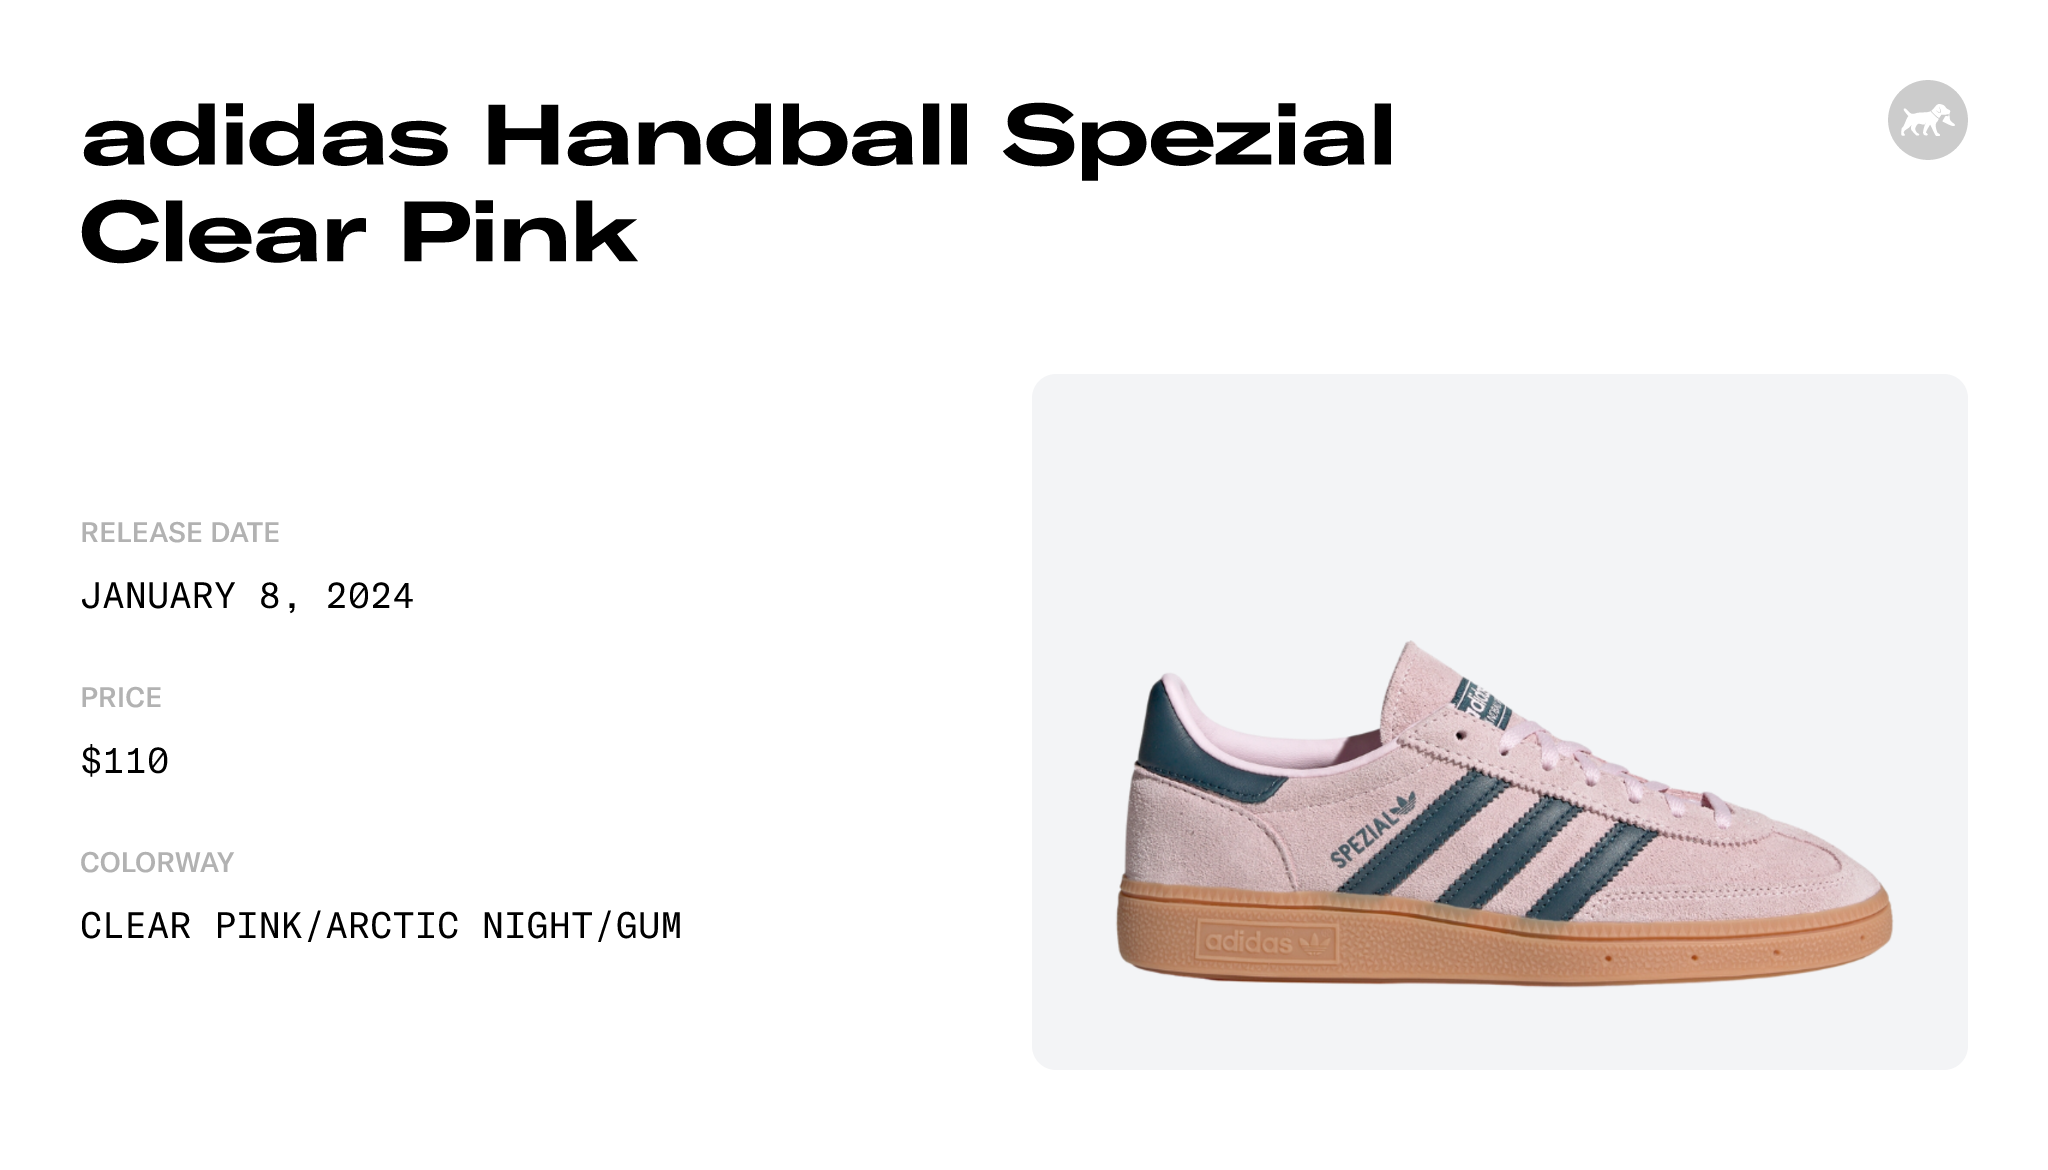 adidas Handball Spezial Clear Pink - IF6561 Raffles and Release Date